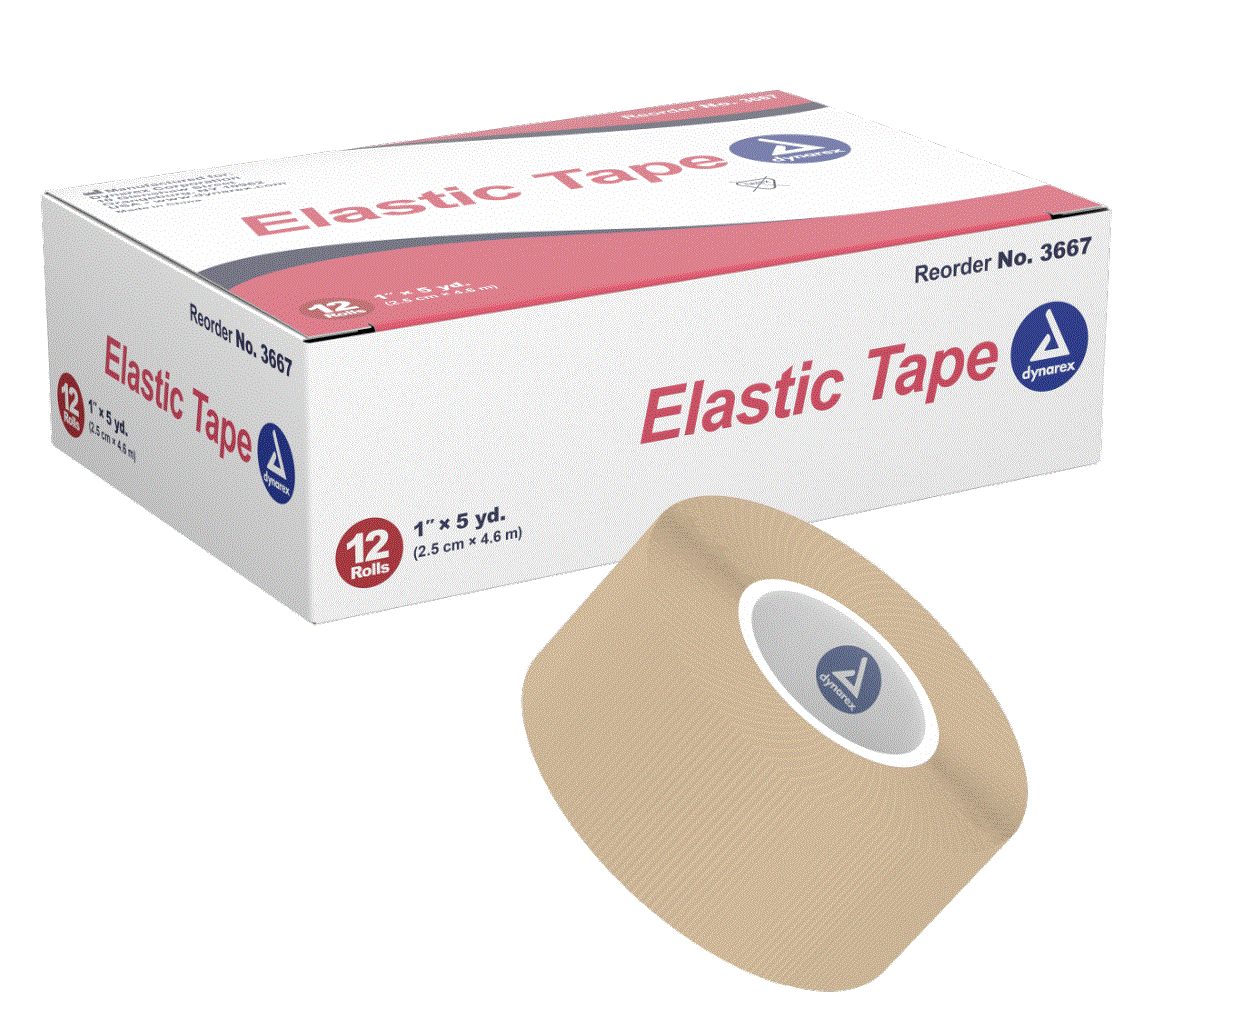 Elastic Tape Products, Supplies and Equipment